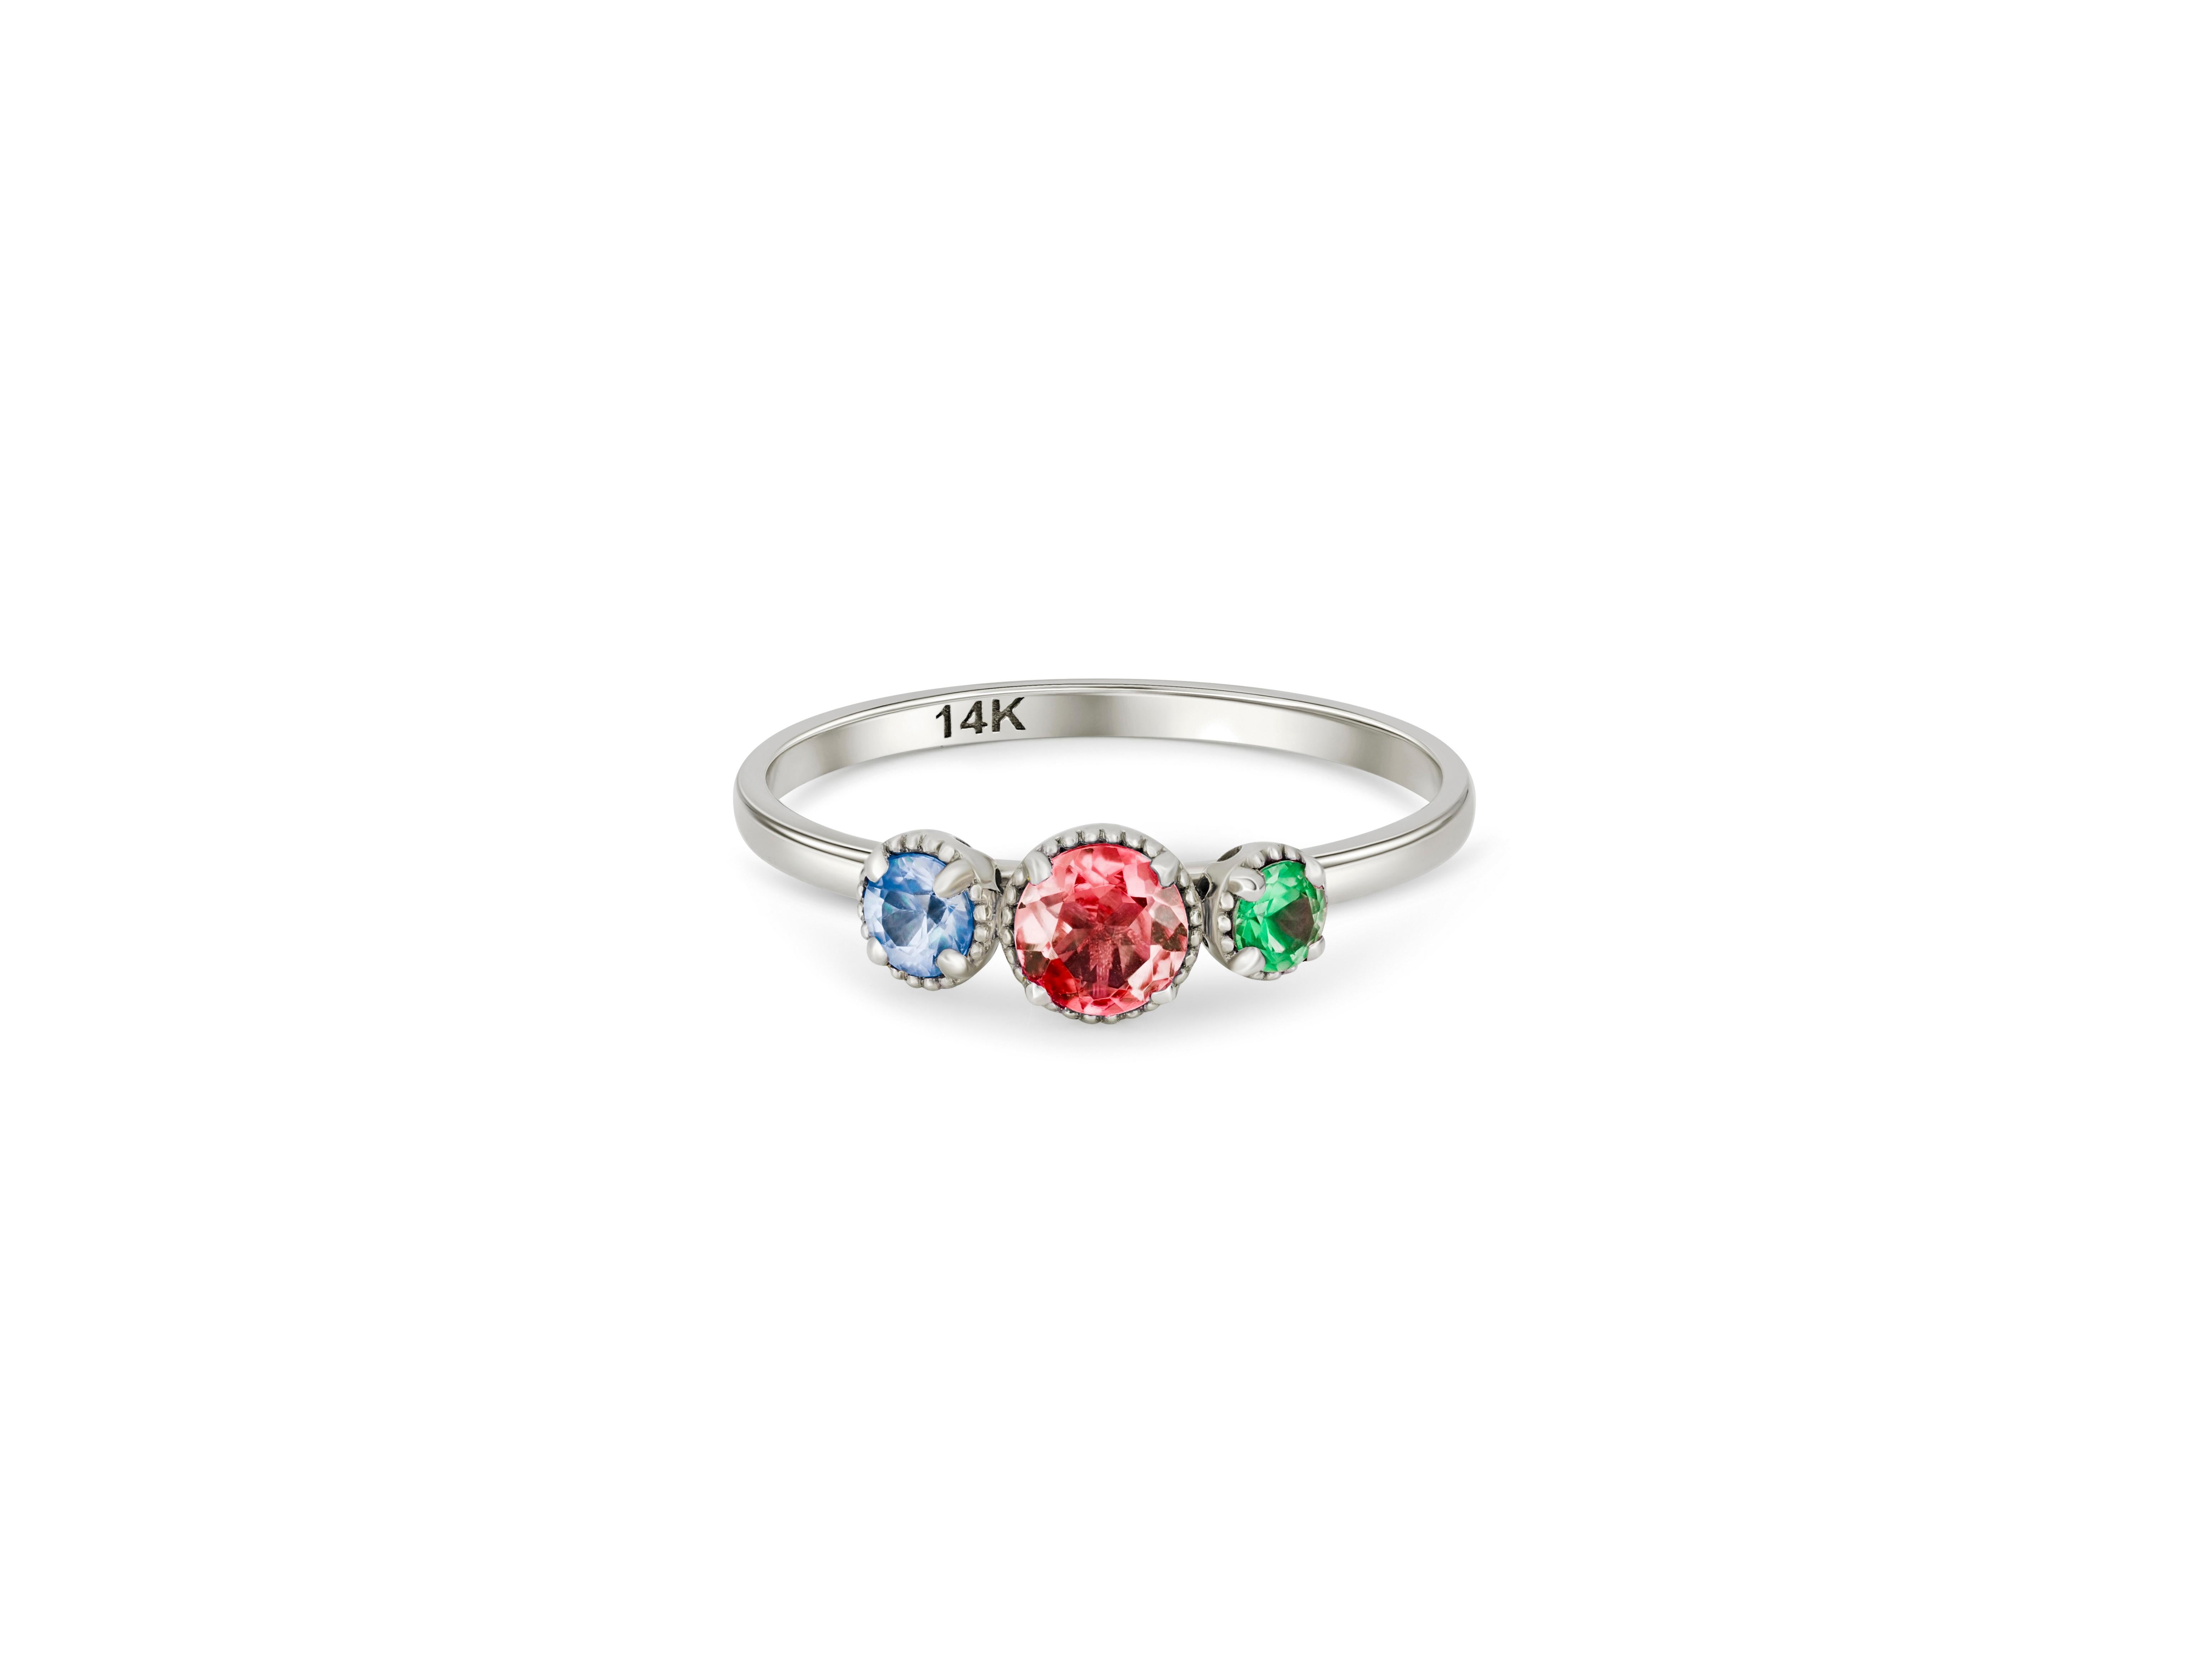 Trio gems 14k gold ring.
3 gemstone palette 14k gold ring.  Topaz, ruby, emerald 14k gold ring. Color contrast gold ring. Pink, blue and green gemstone ring. 

Metal: 14k gold
Weight: 1.8 gr depends from size

Gemstones:
Blue: lab topaz, round